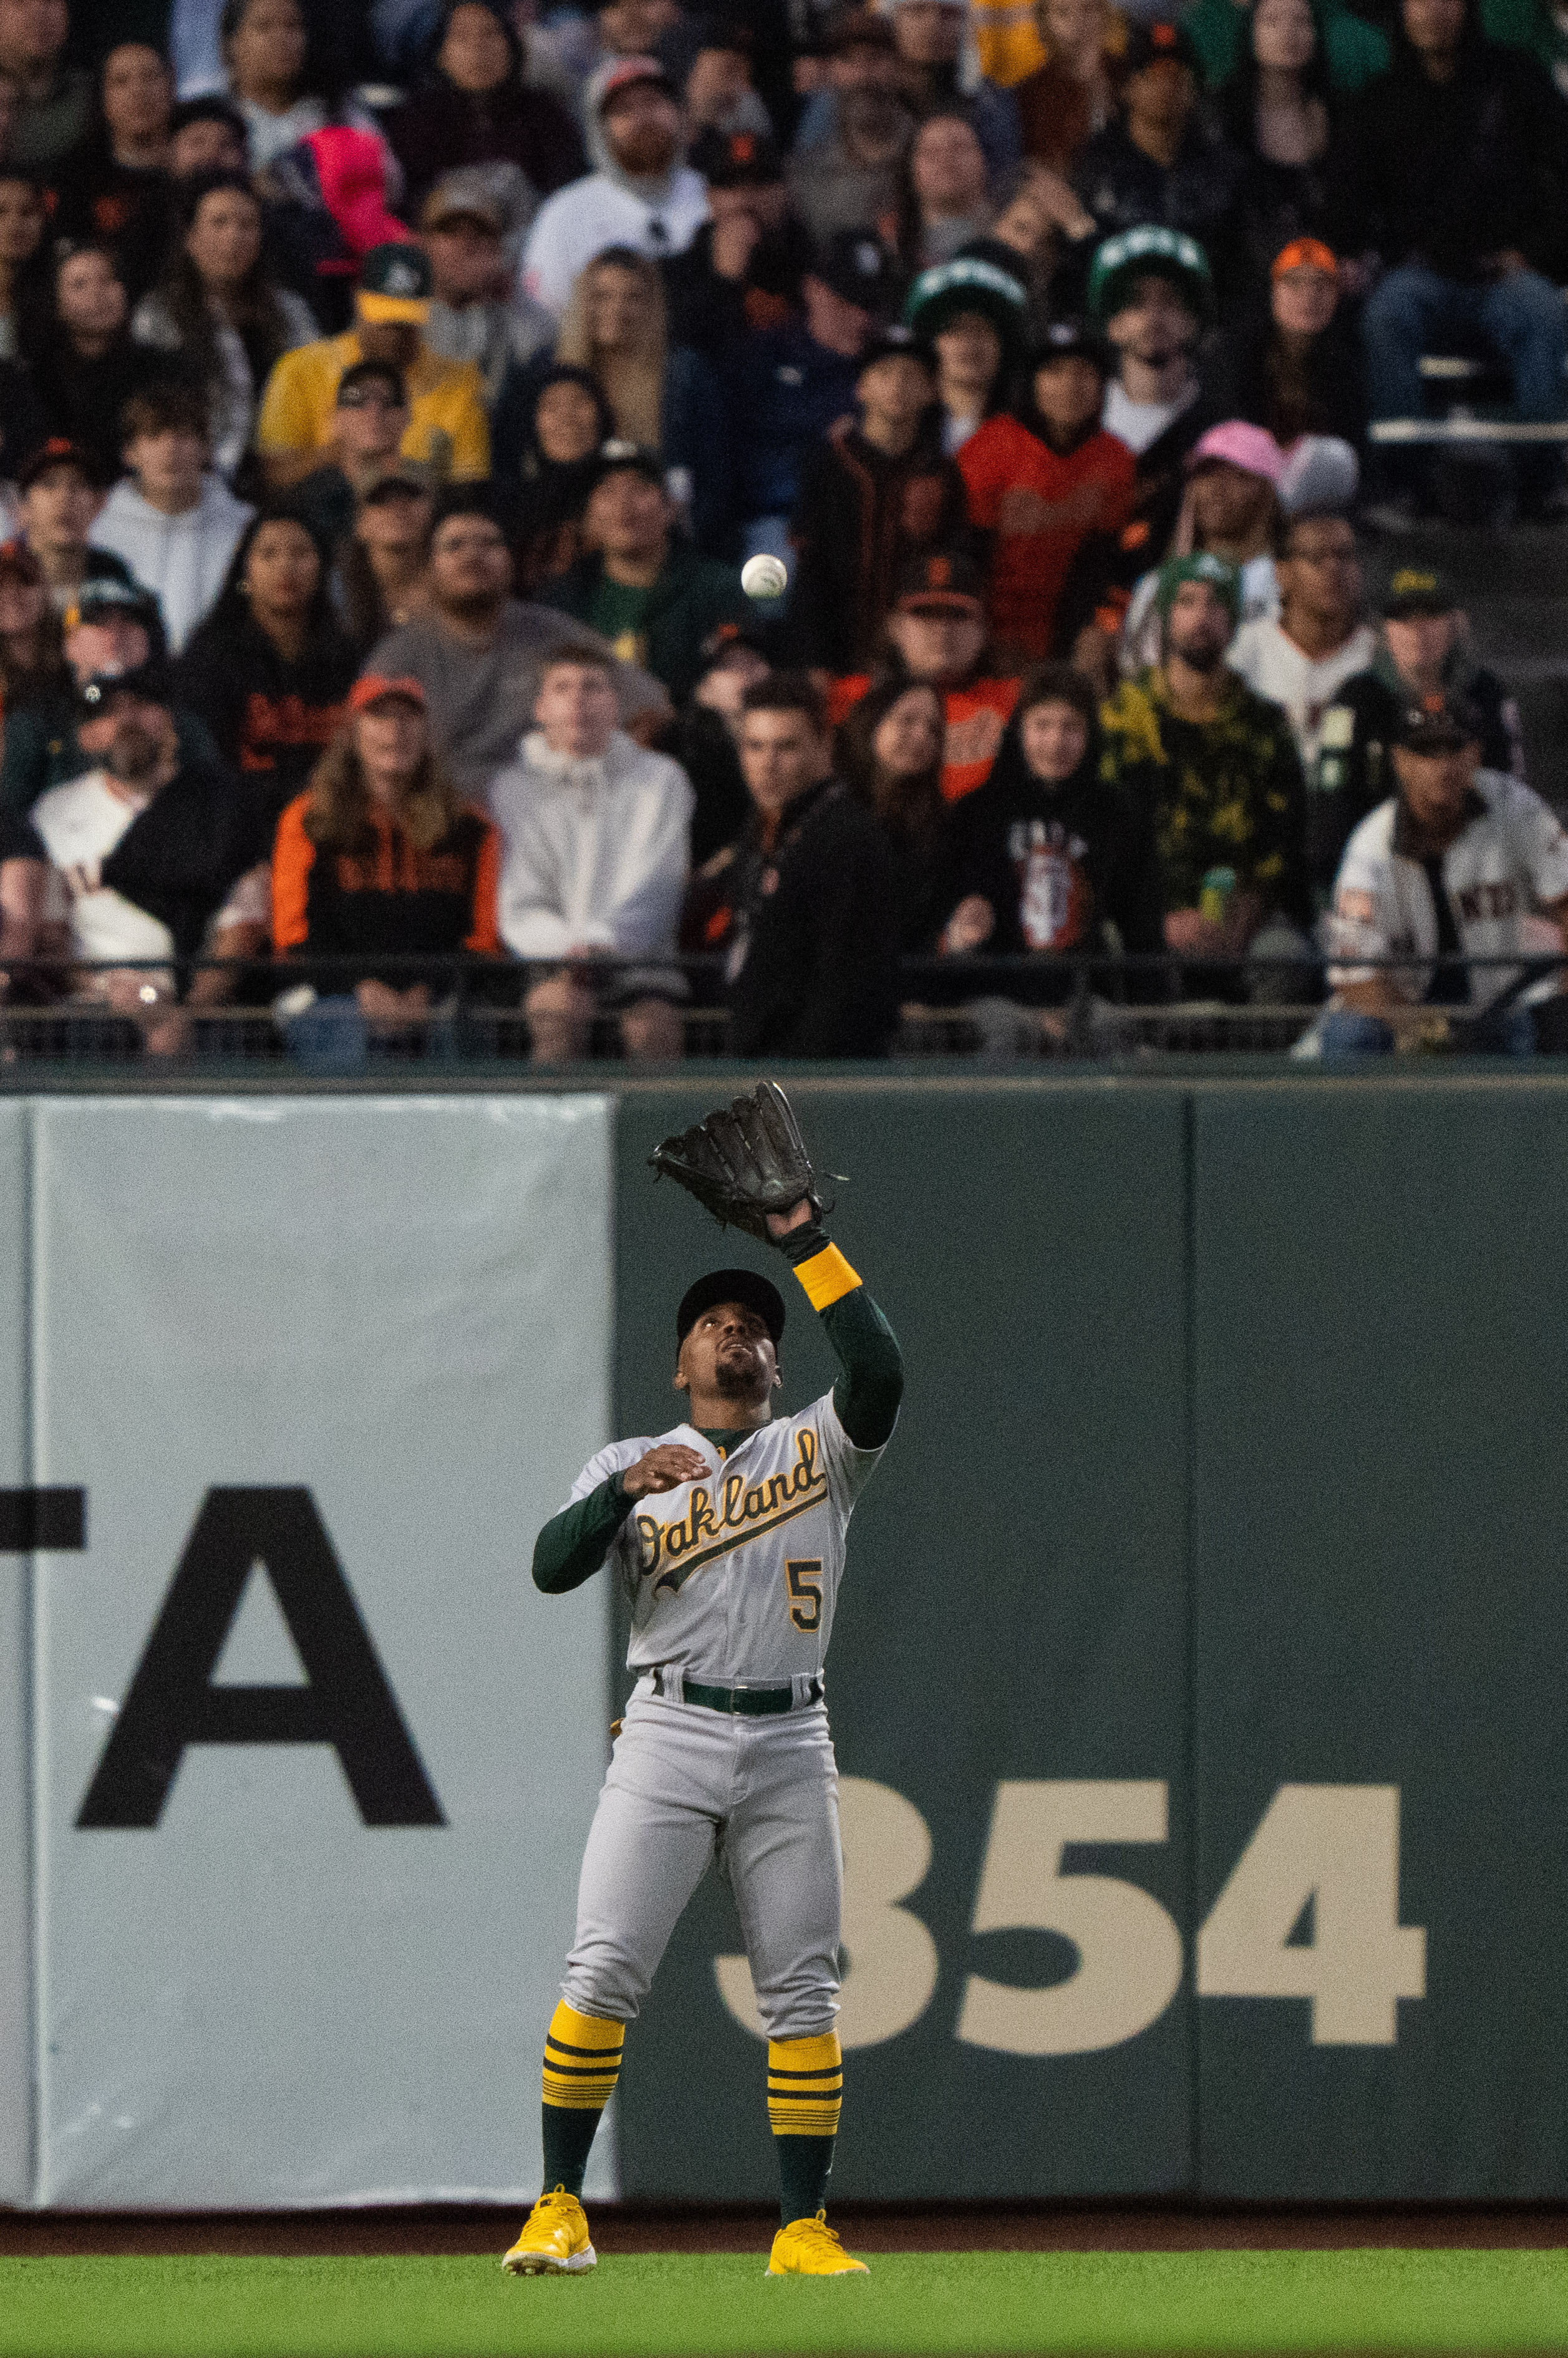 Giants return home, end losing streak by scraping out win over A's